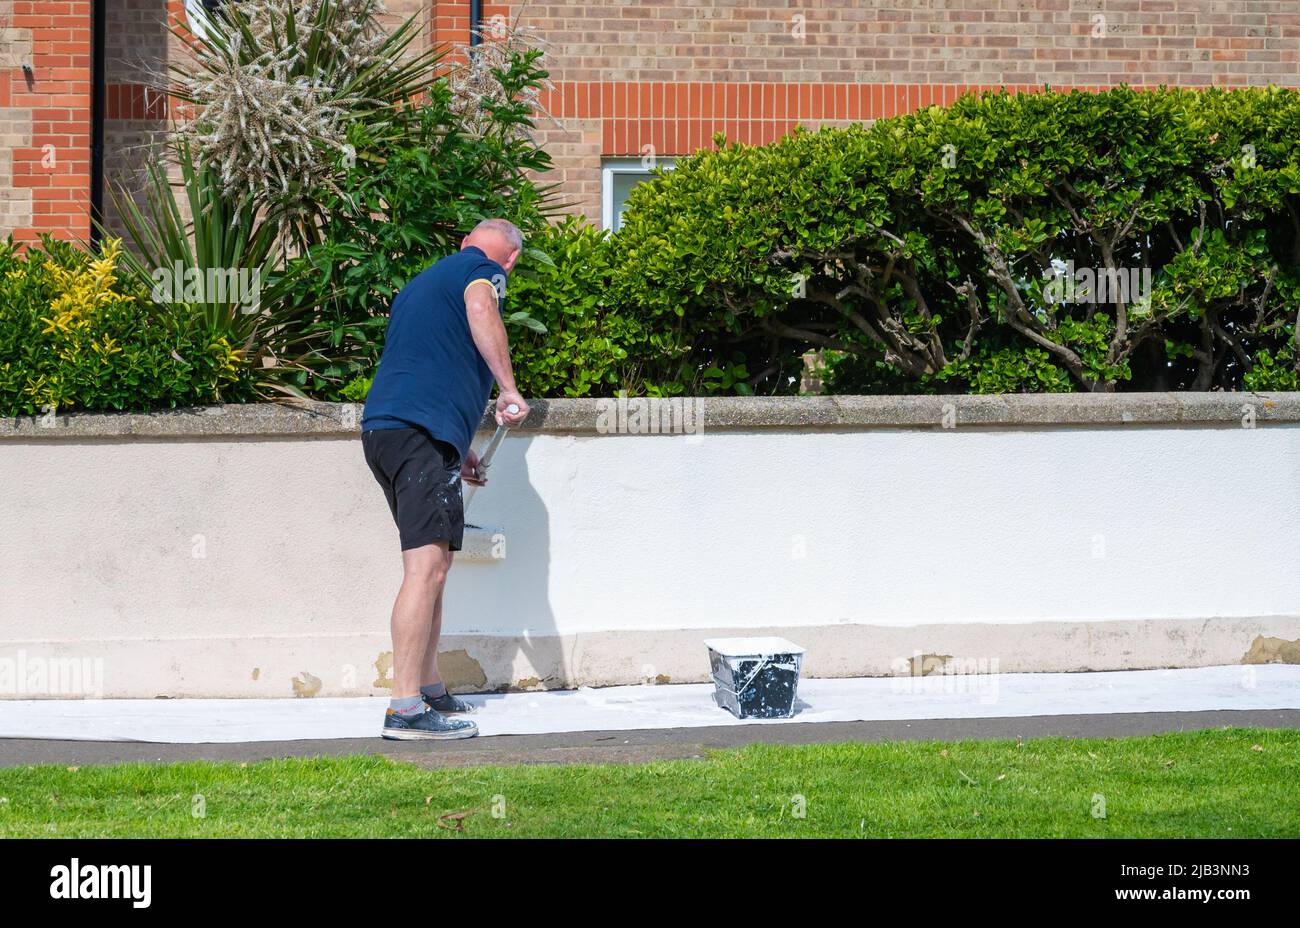 Man standing on a public pavement while painting an exterior garden wall in white, using a paint roller. Stock Photo